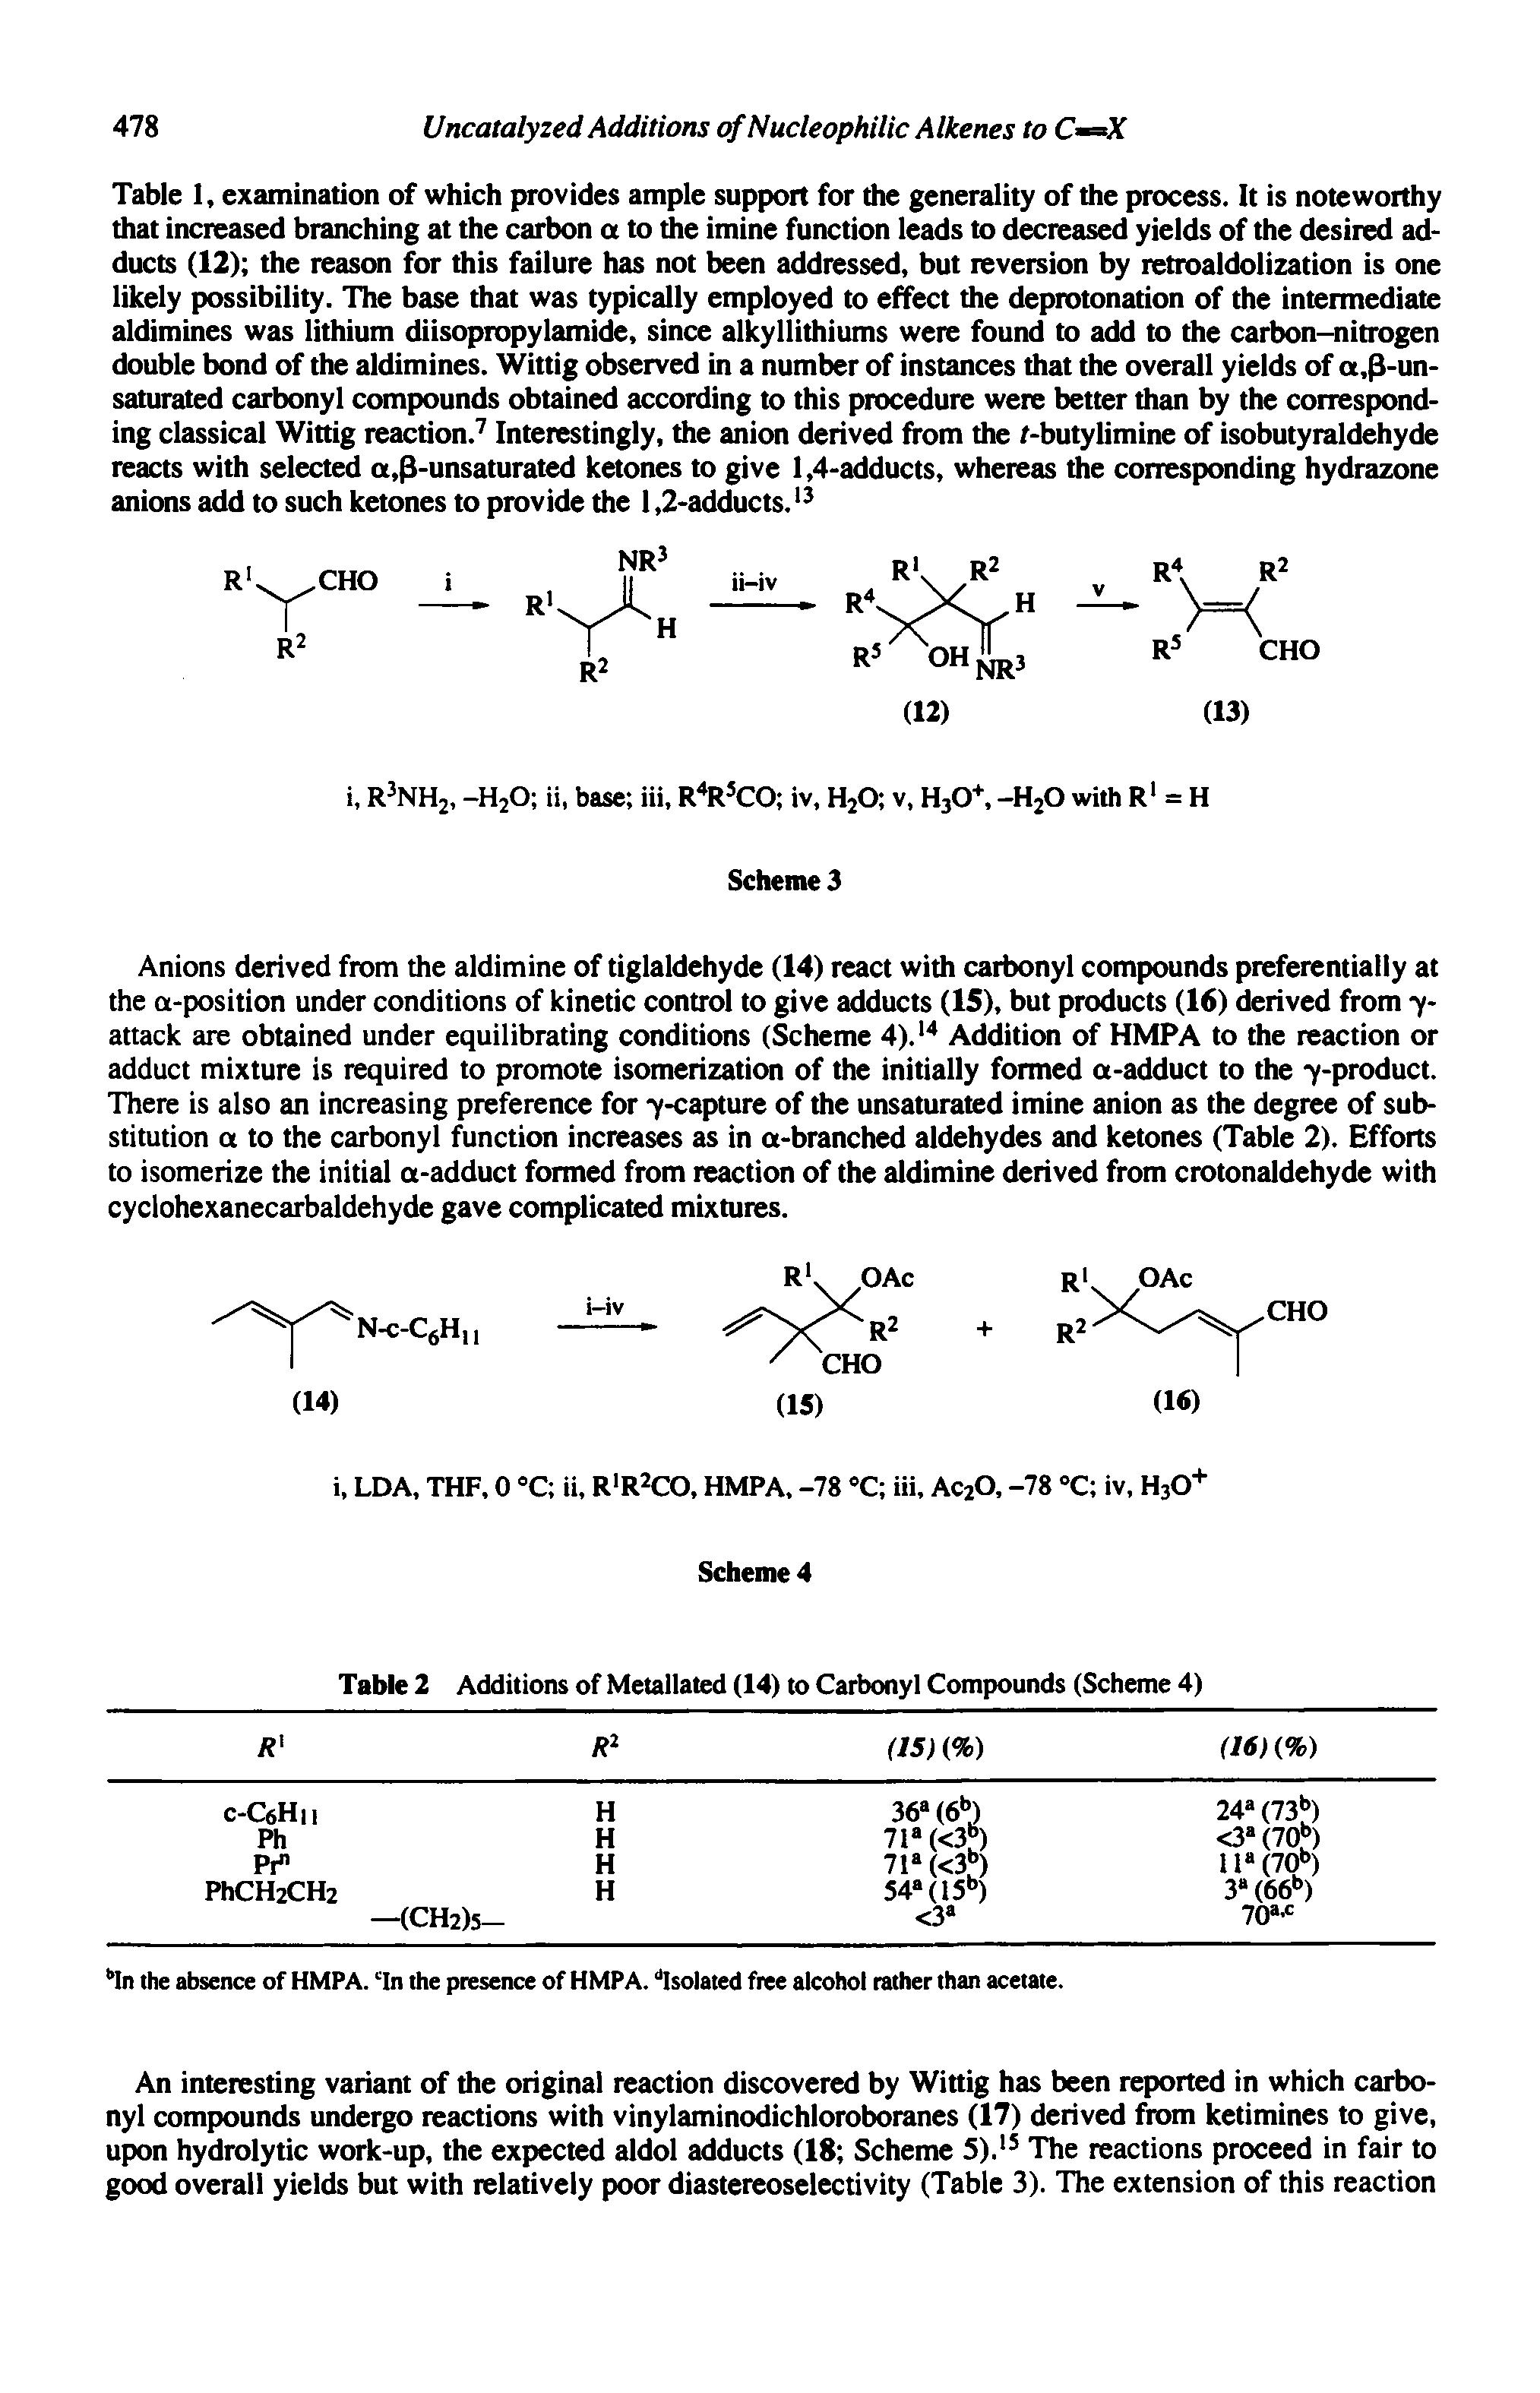 Table I, examination of which provides ample support for the generality of the process. It is noteworthy that increased branching at the carbon a to the imine function leads to decreased yields of the desired adducts (12) the reason for this failure has not been addressed, but reversion by retroaldolization is one likely possibility. The base that was typically employed to effect the deprotonation of the intermediate aldimines was lithium diisopropylamide, since alkyllithiums were found to add to the carbon-nitrogen double bond of the aldimines. Wittig observed in a number of instances that the overall yields of a,3-un-saturated carbonyl compounds obtained according to this procedure were better than by the corresponding classical Wittig reaction. Interestingly, the anion derived from the r-butylimine of isobutyraldehyde reacts with selected a,3-unsaturated ketones to give 1,4-adducts, whereas the corresponding hydrazone anions add to such ketones to provide the 1,2-adducts. ...